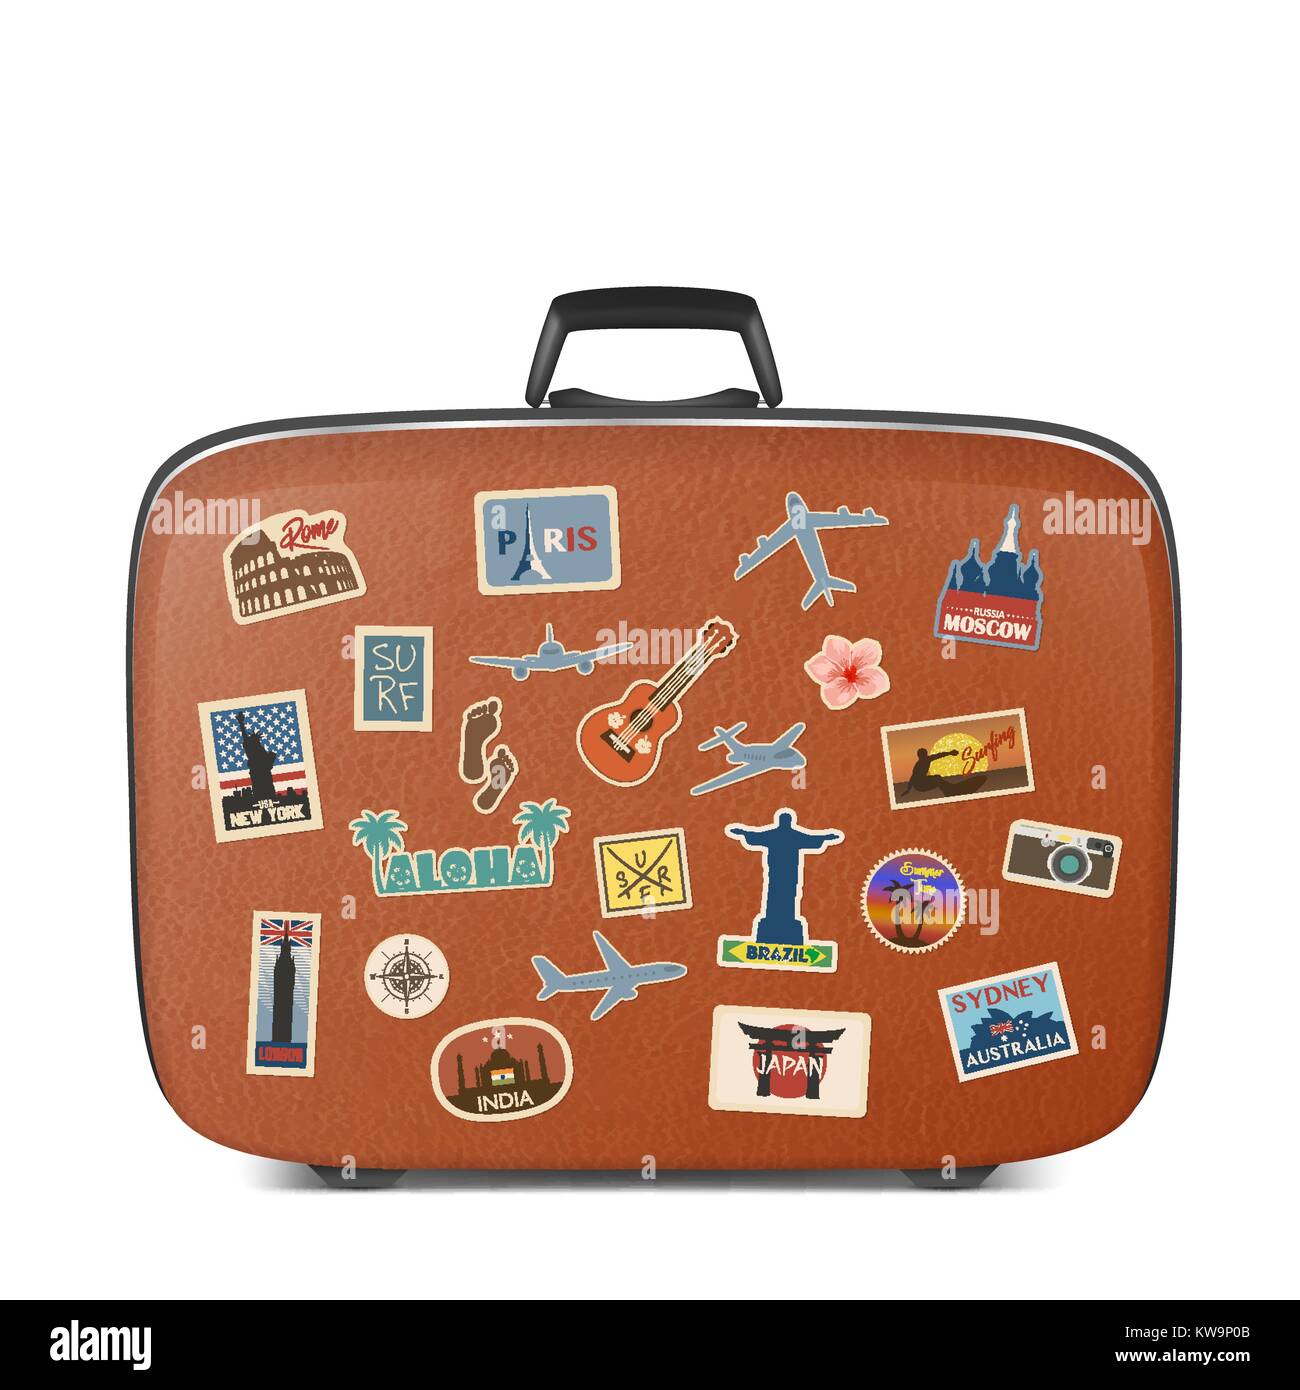 Luggage Stickers, Suitcases City Stickers